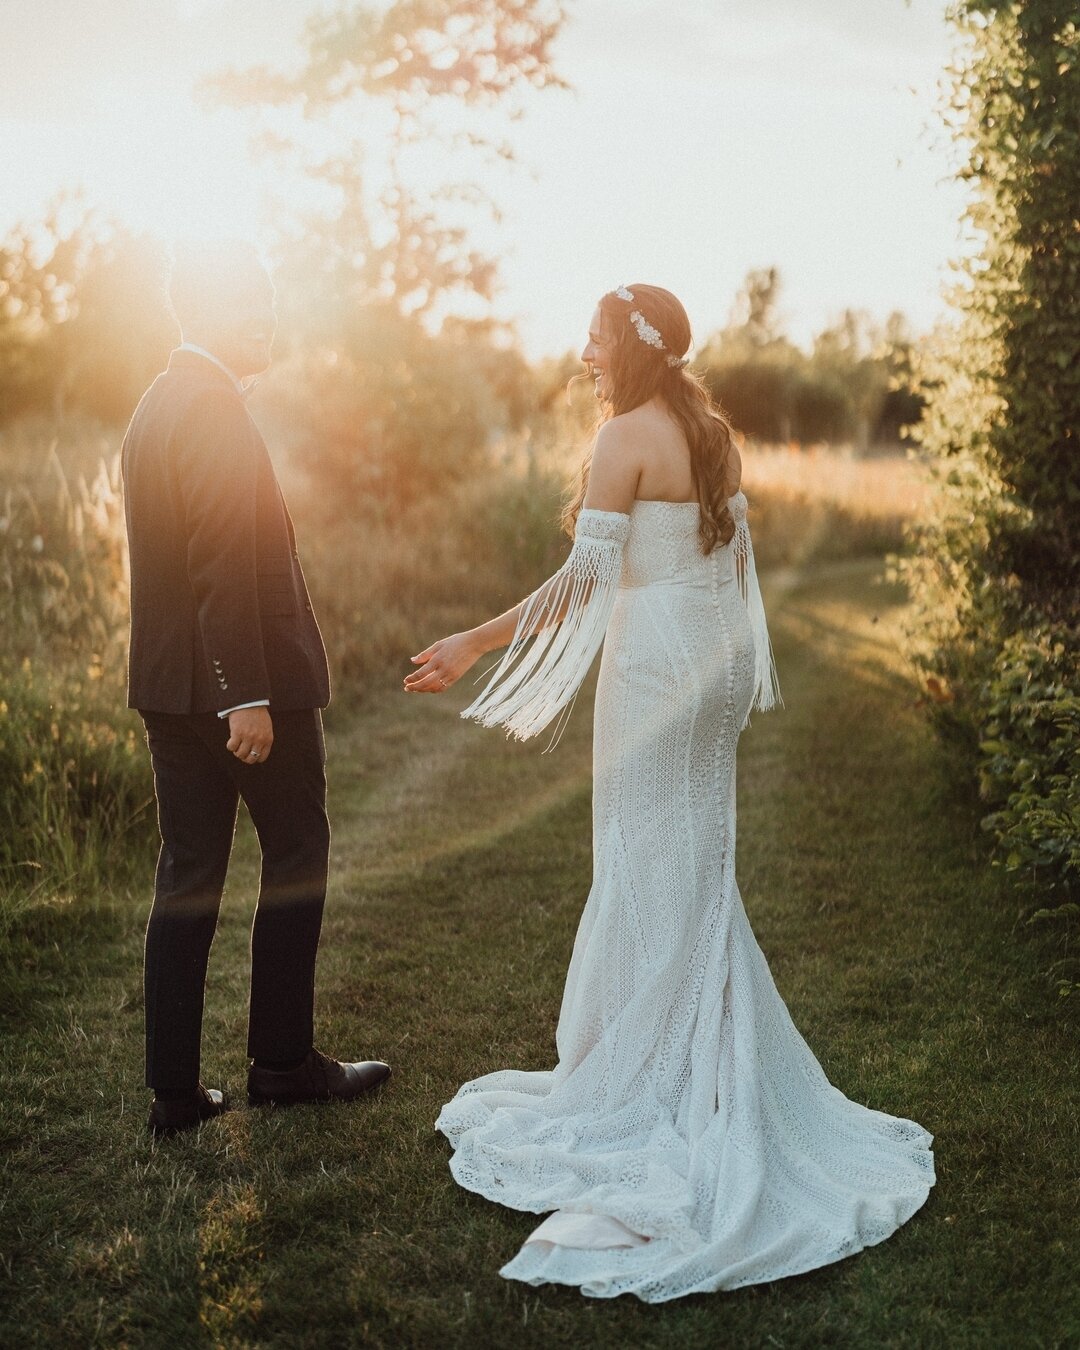 The most beautiful golden hour at @southfarmweddings 🌞